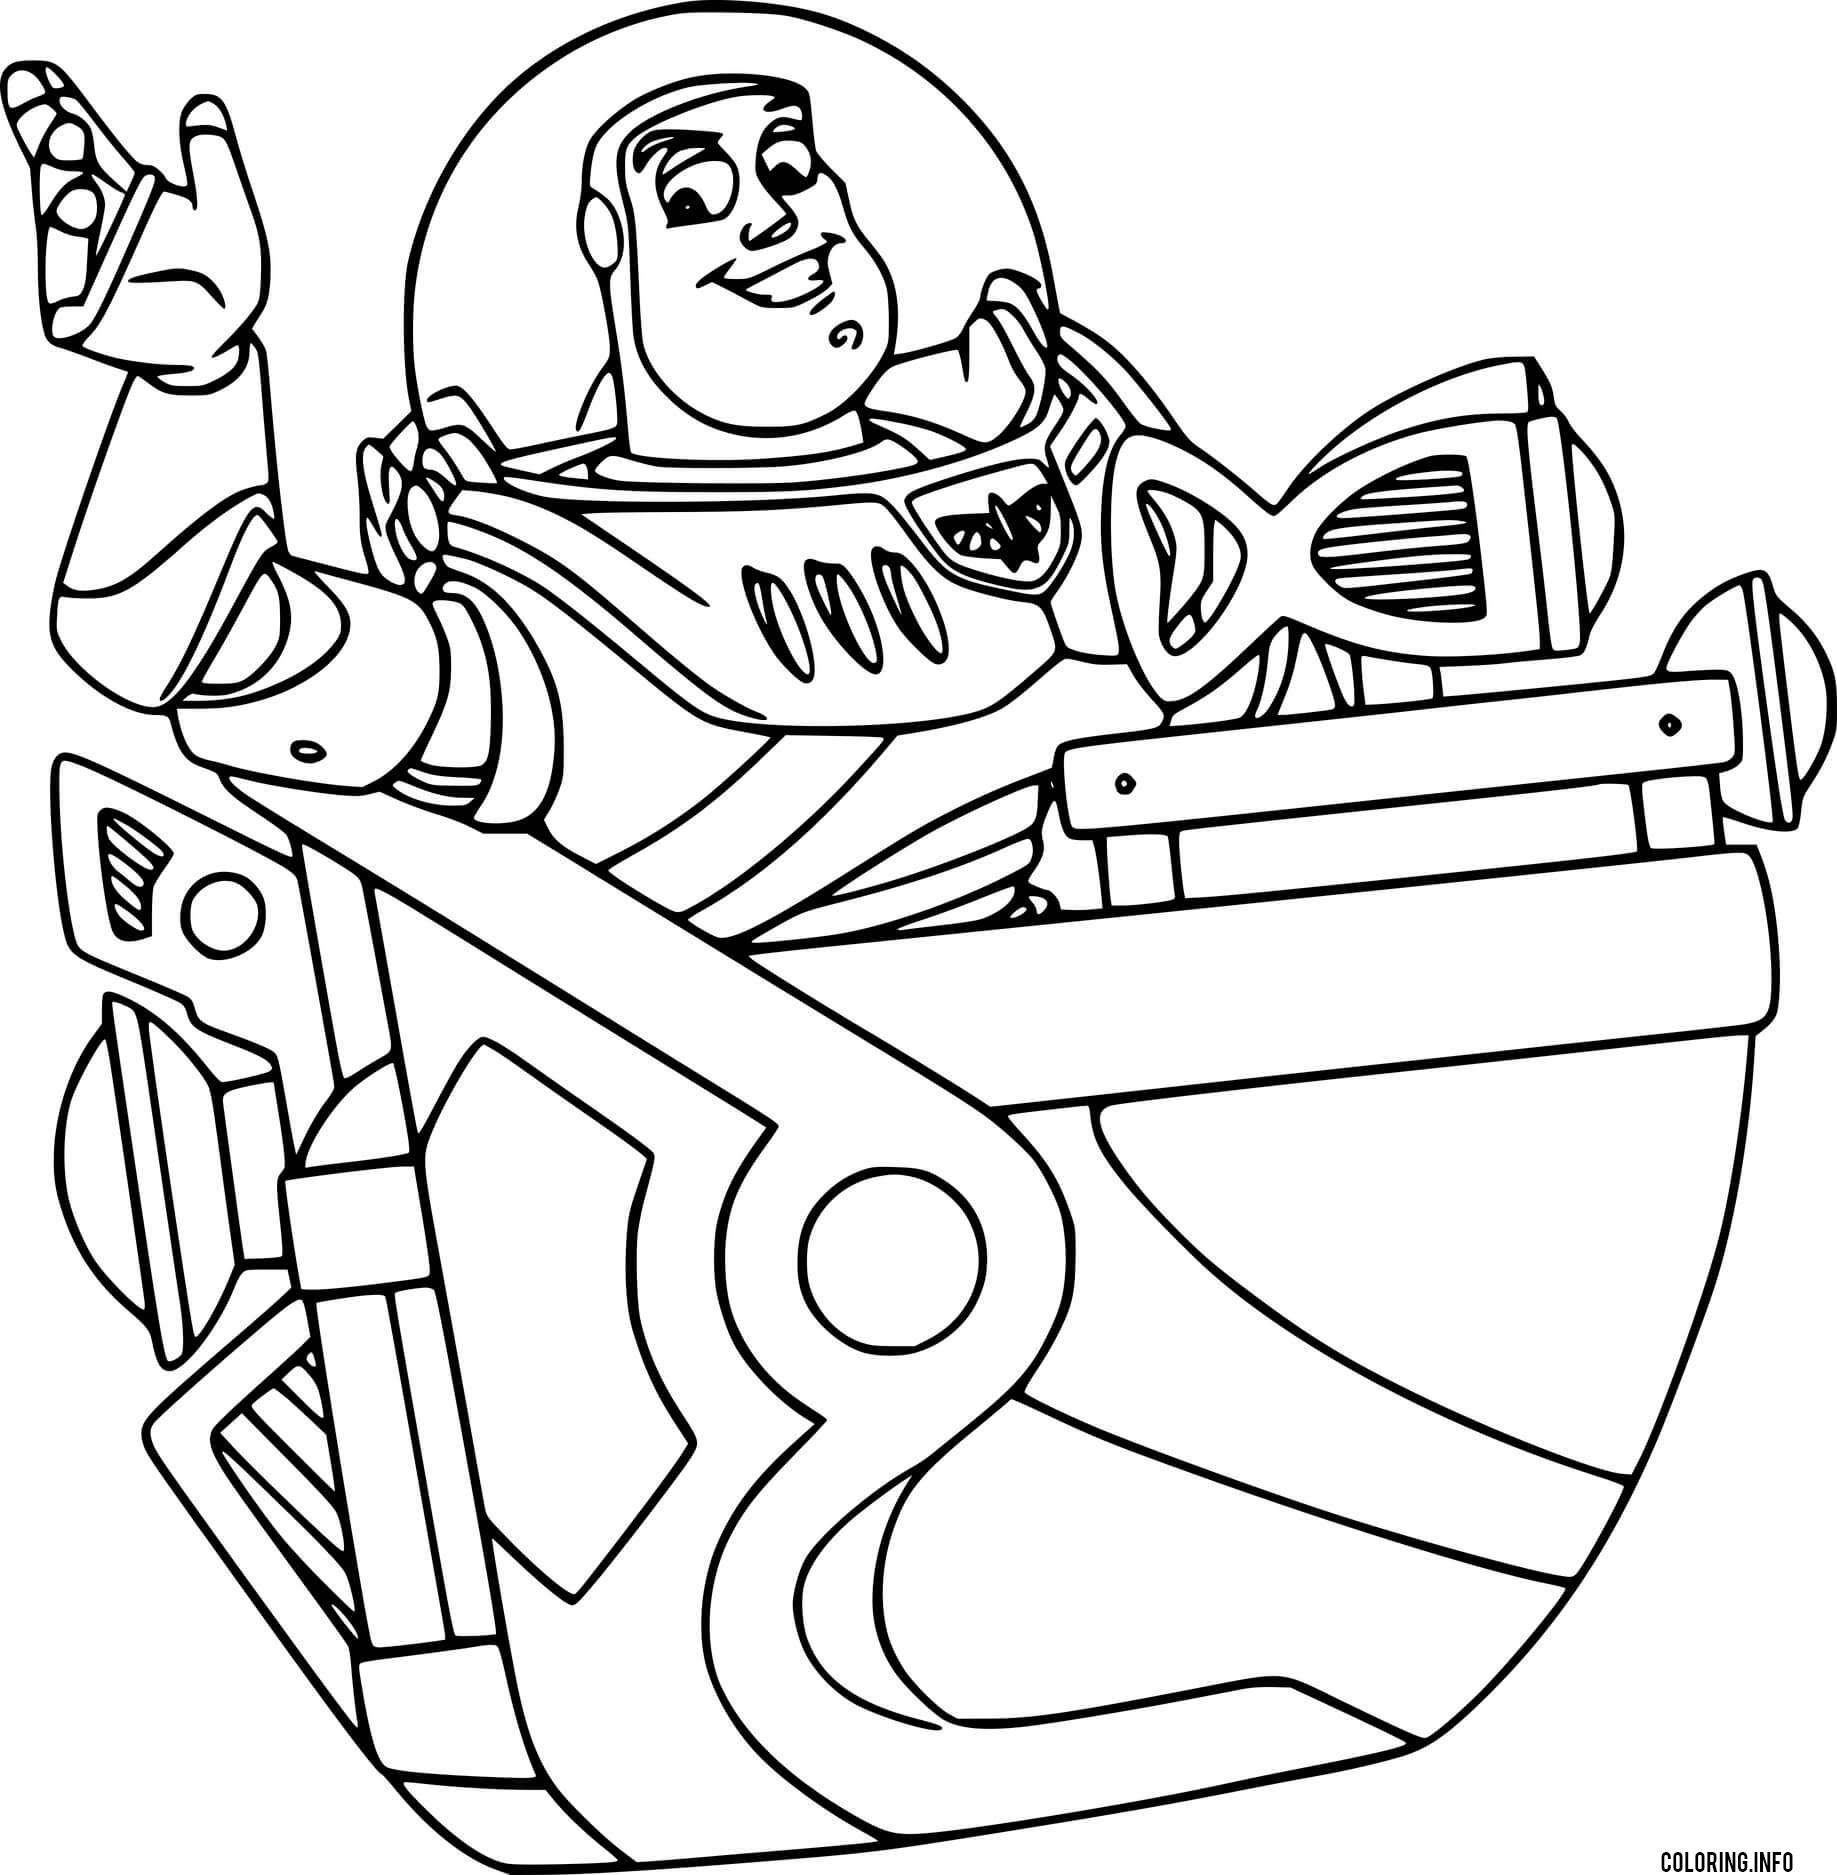 Buzz Lightyear On The Boat coloring